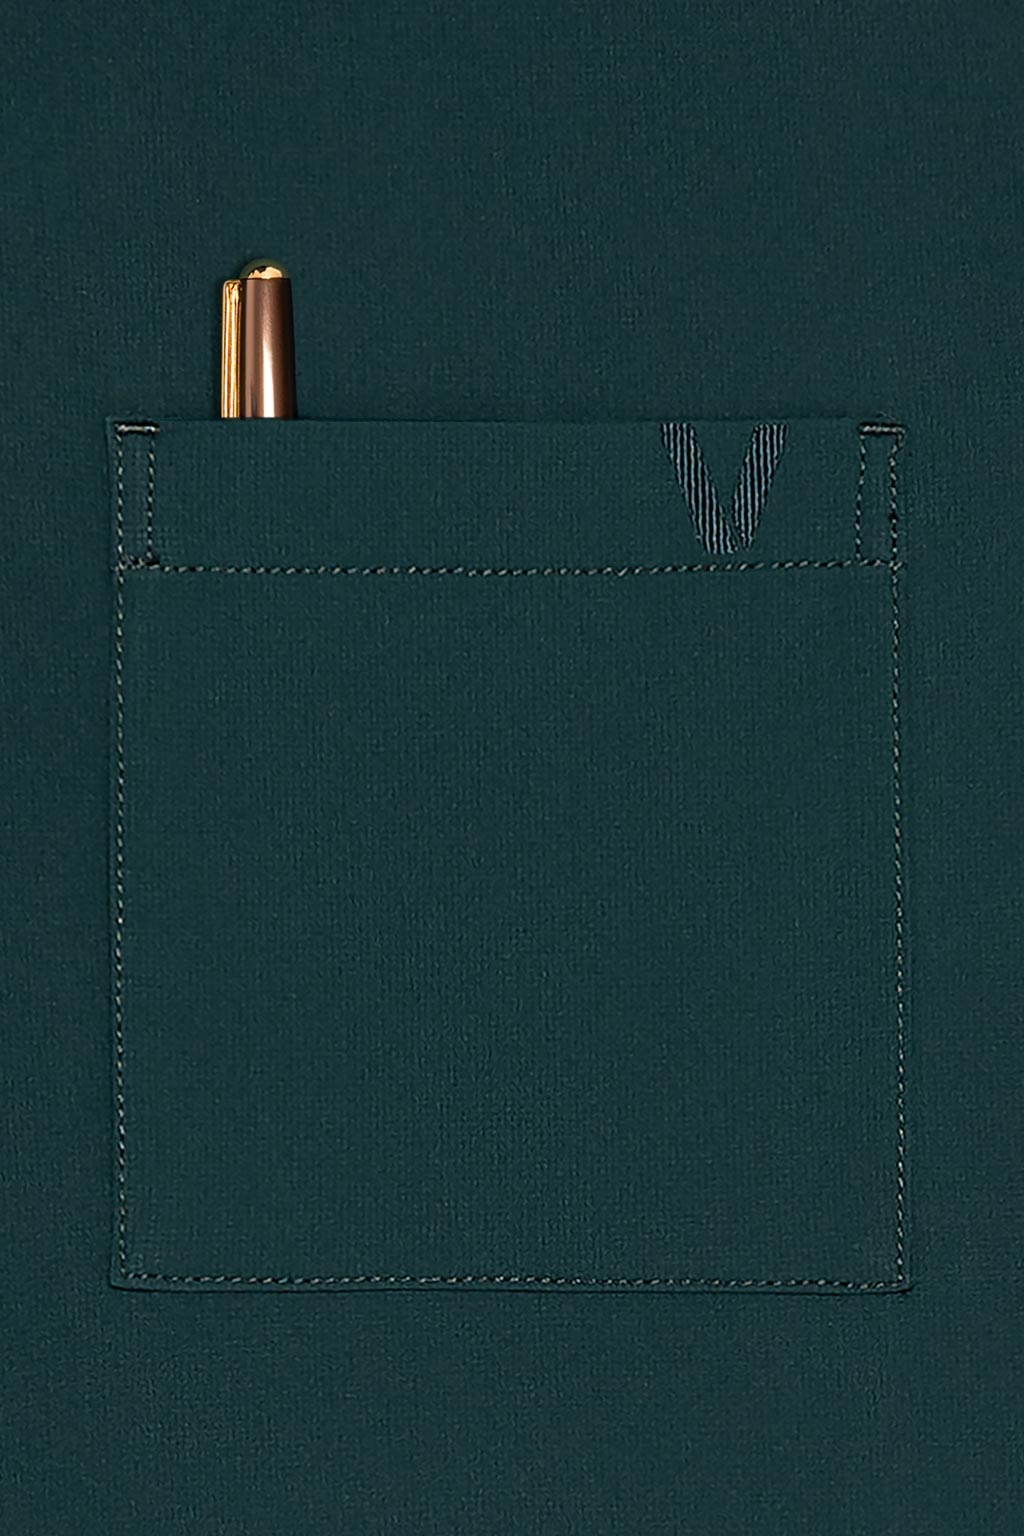 A tonal embroidered logo is visible at the chest pocket.